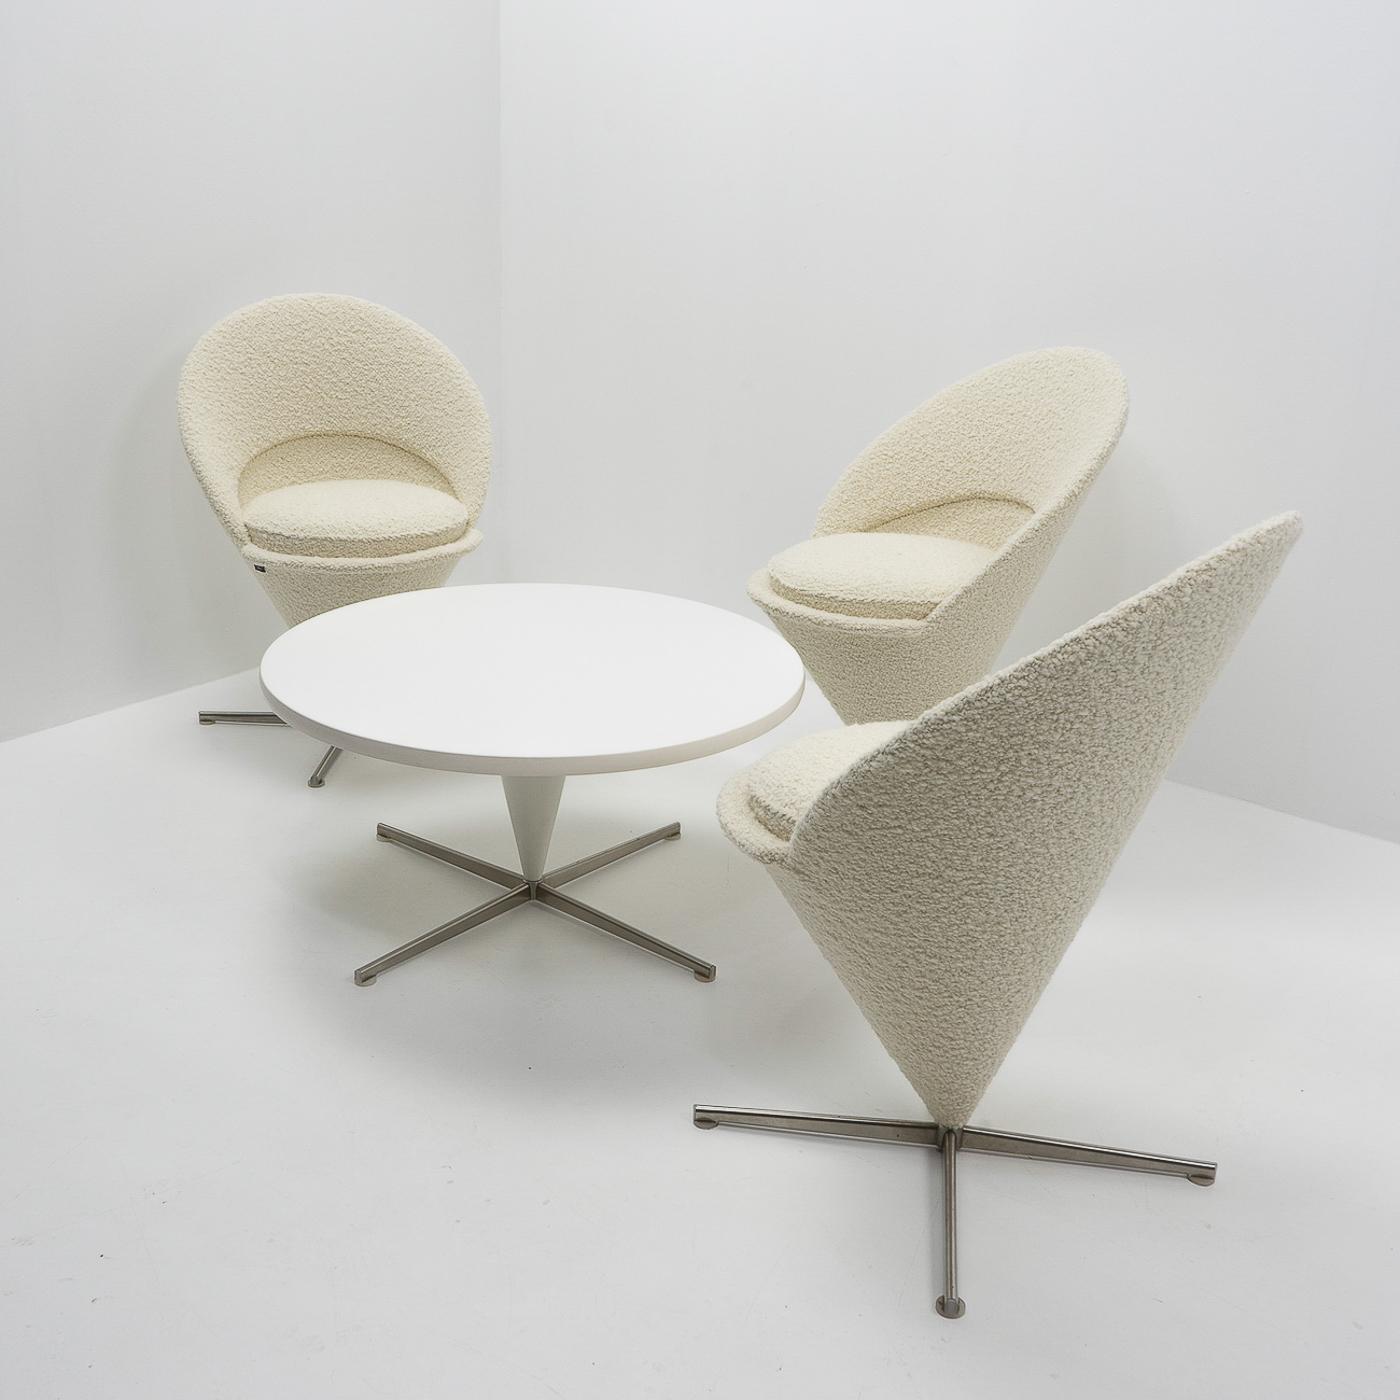 Design Classic Verner Panton Cone Chairs, Vitra, 2000s For Sale 5